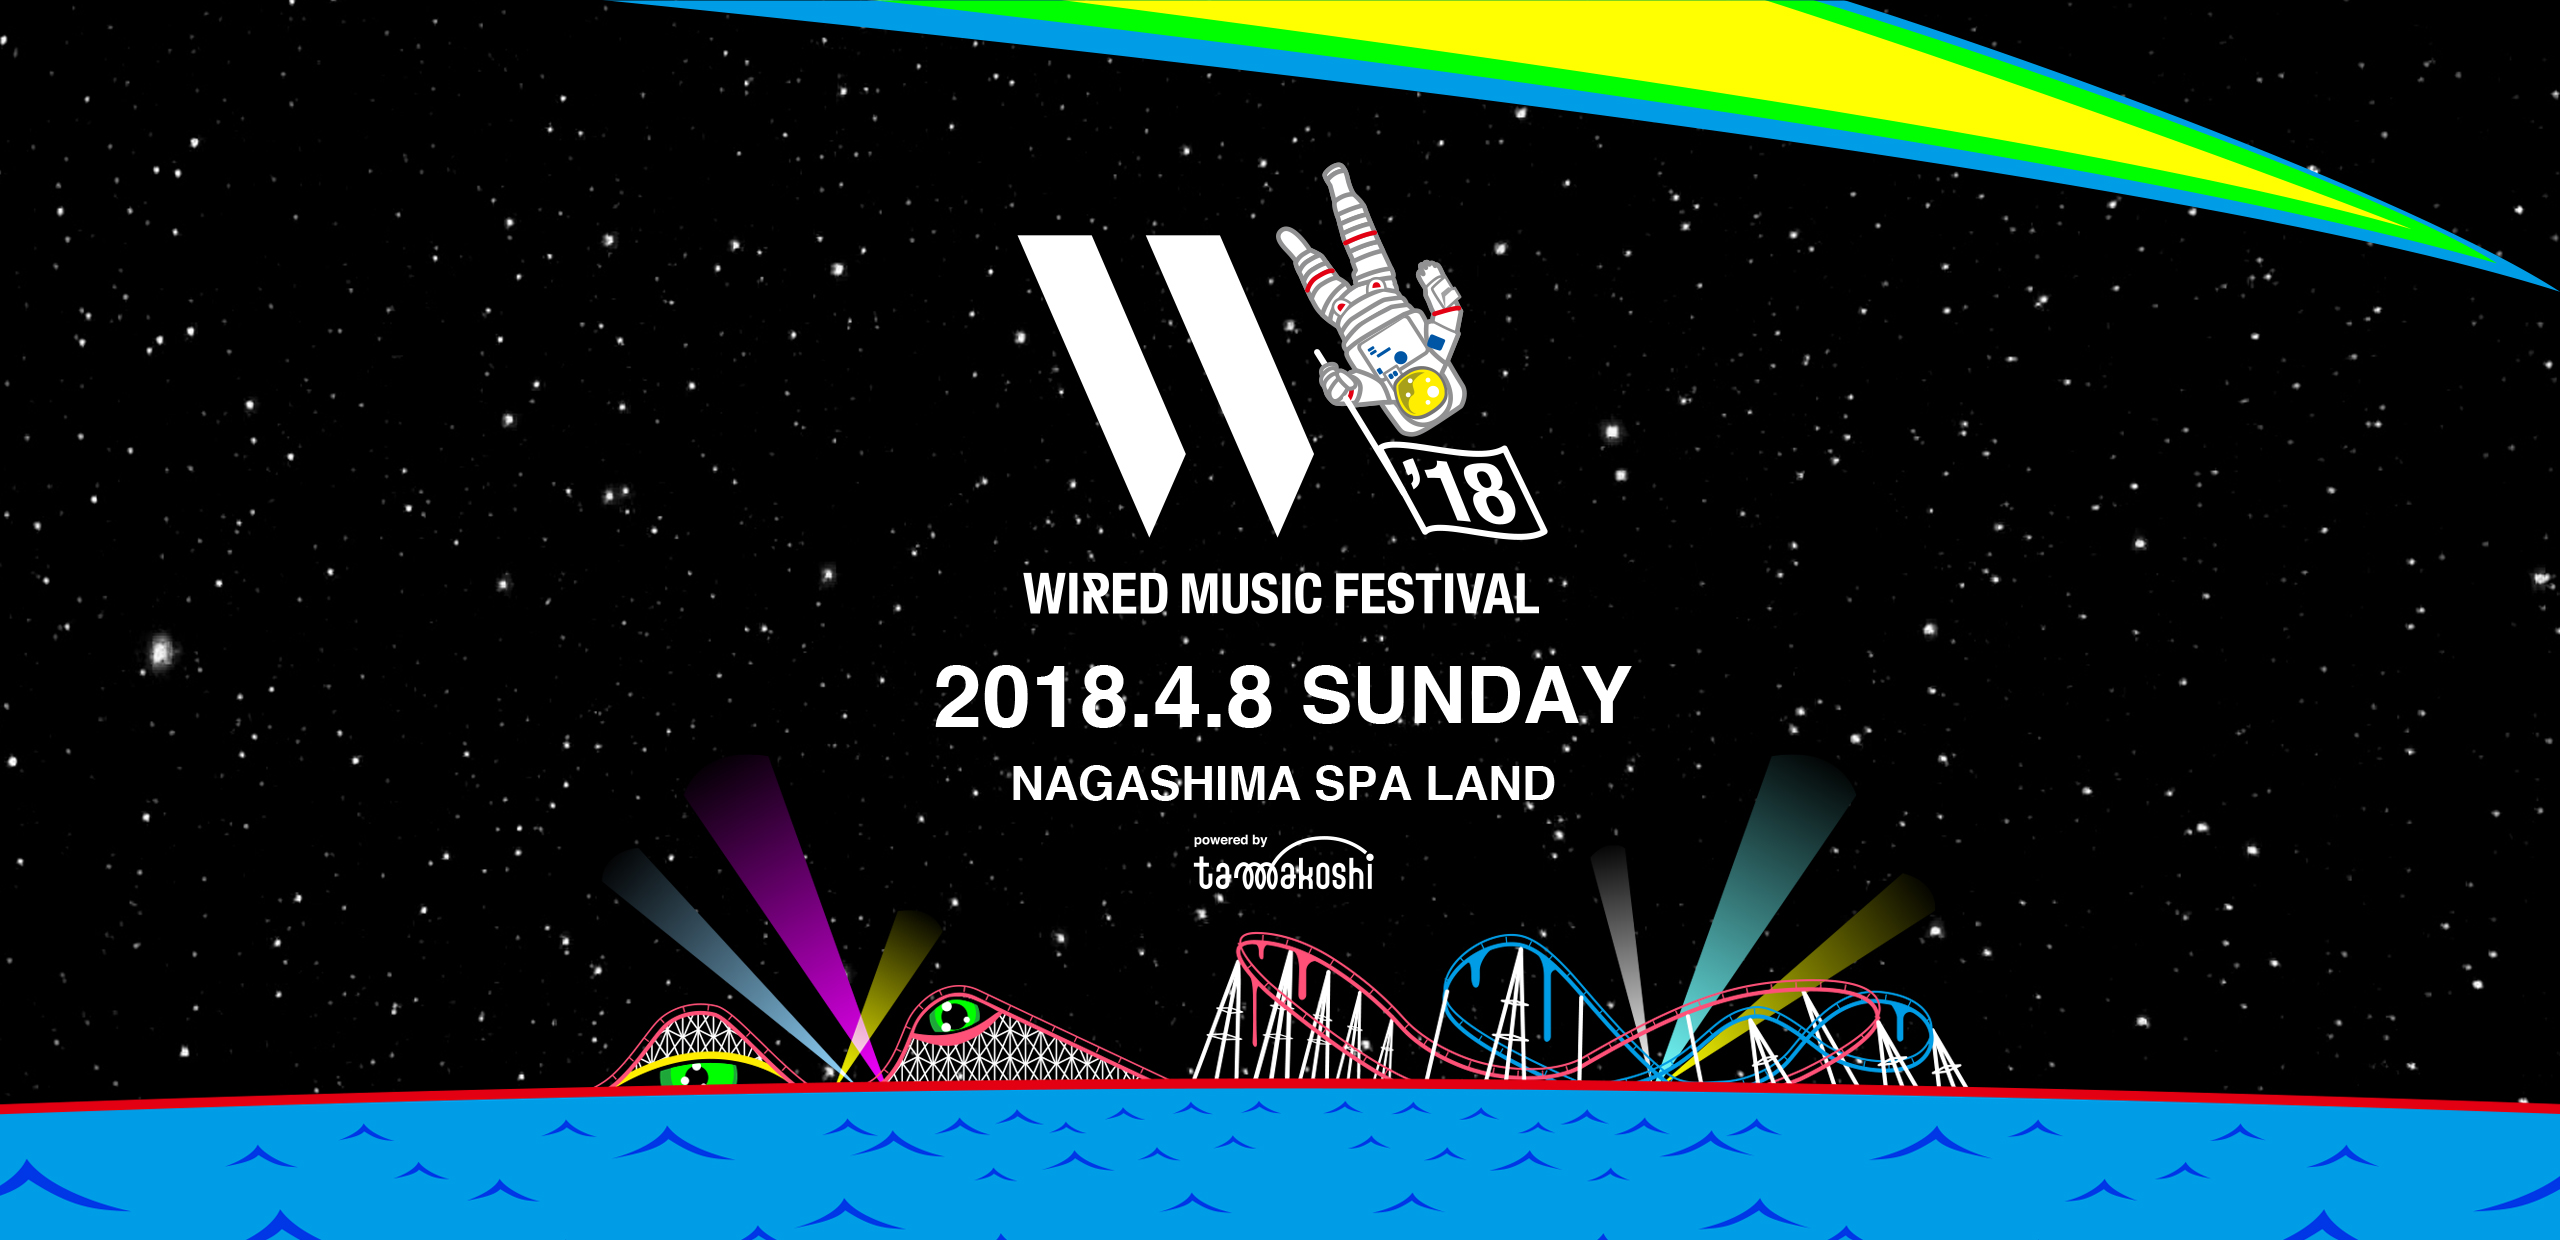 WIRED MUSIC FESTIVAL 2018